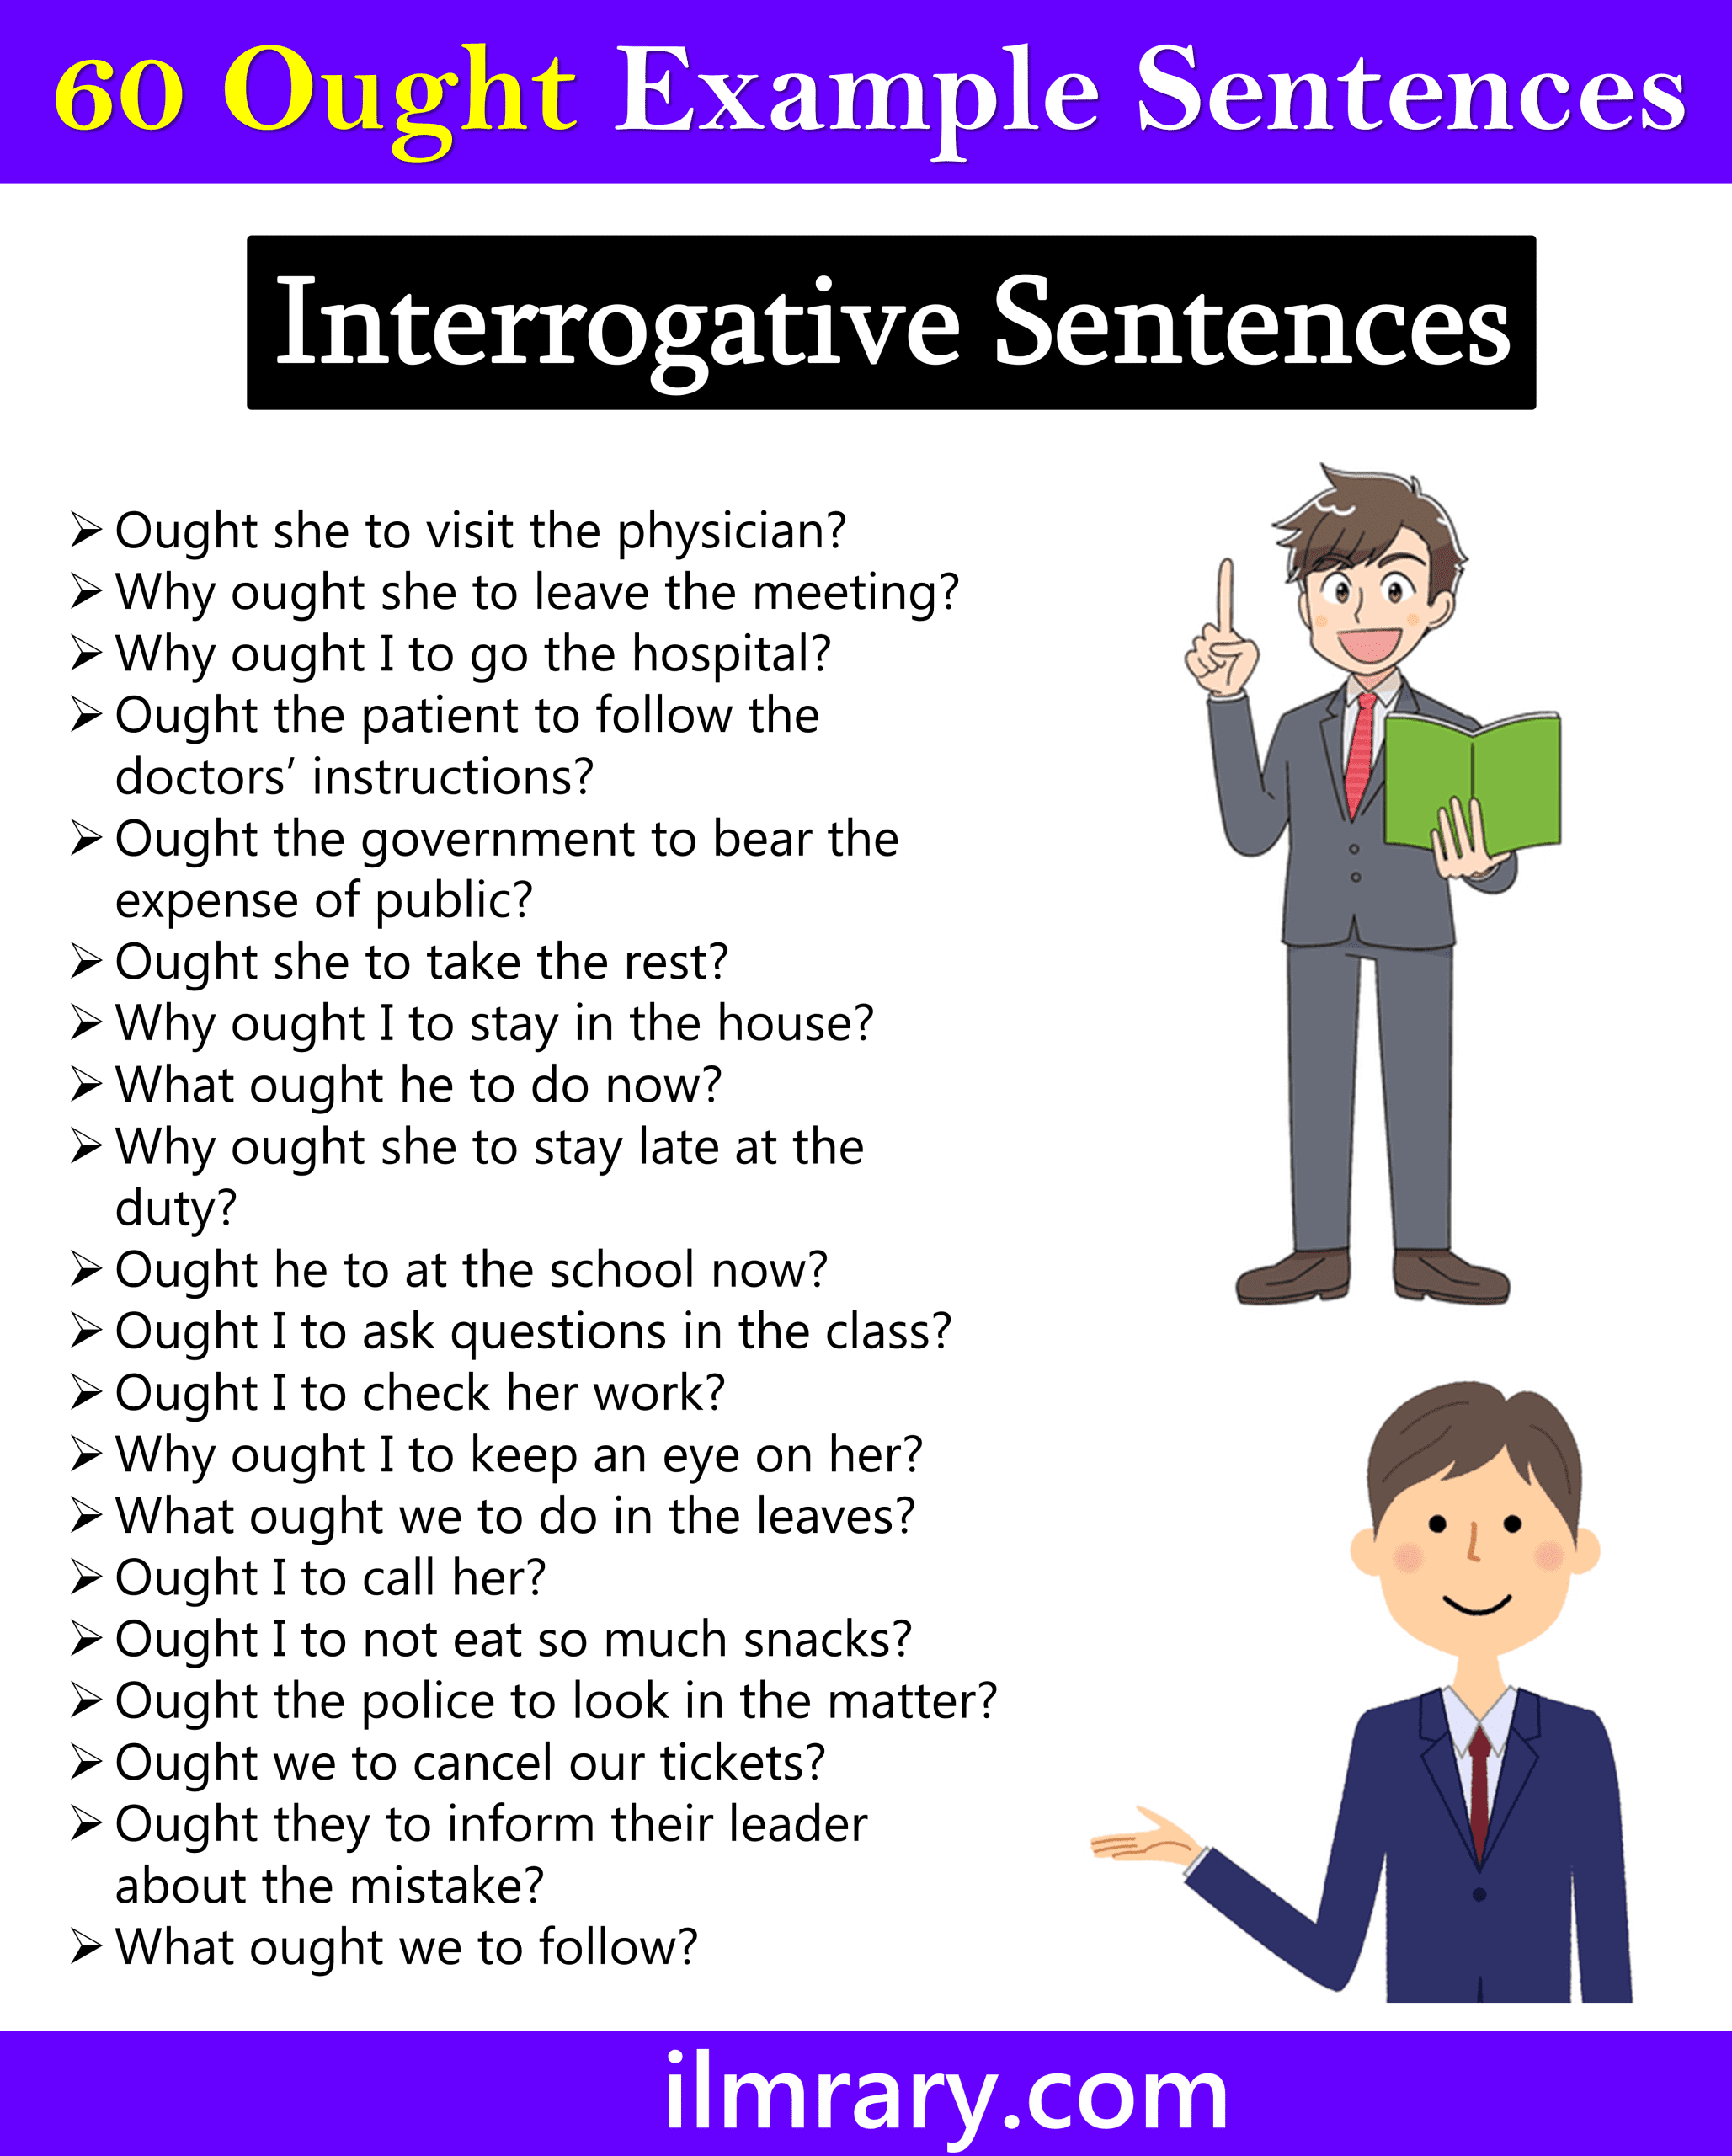 Ought to Use in Interrogative Sentences | 60 Example Sentences of Ought to